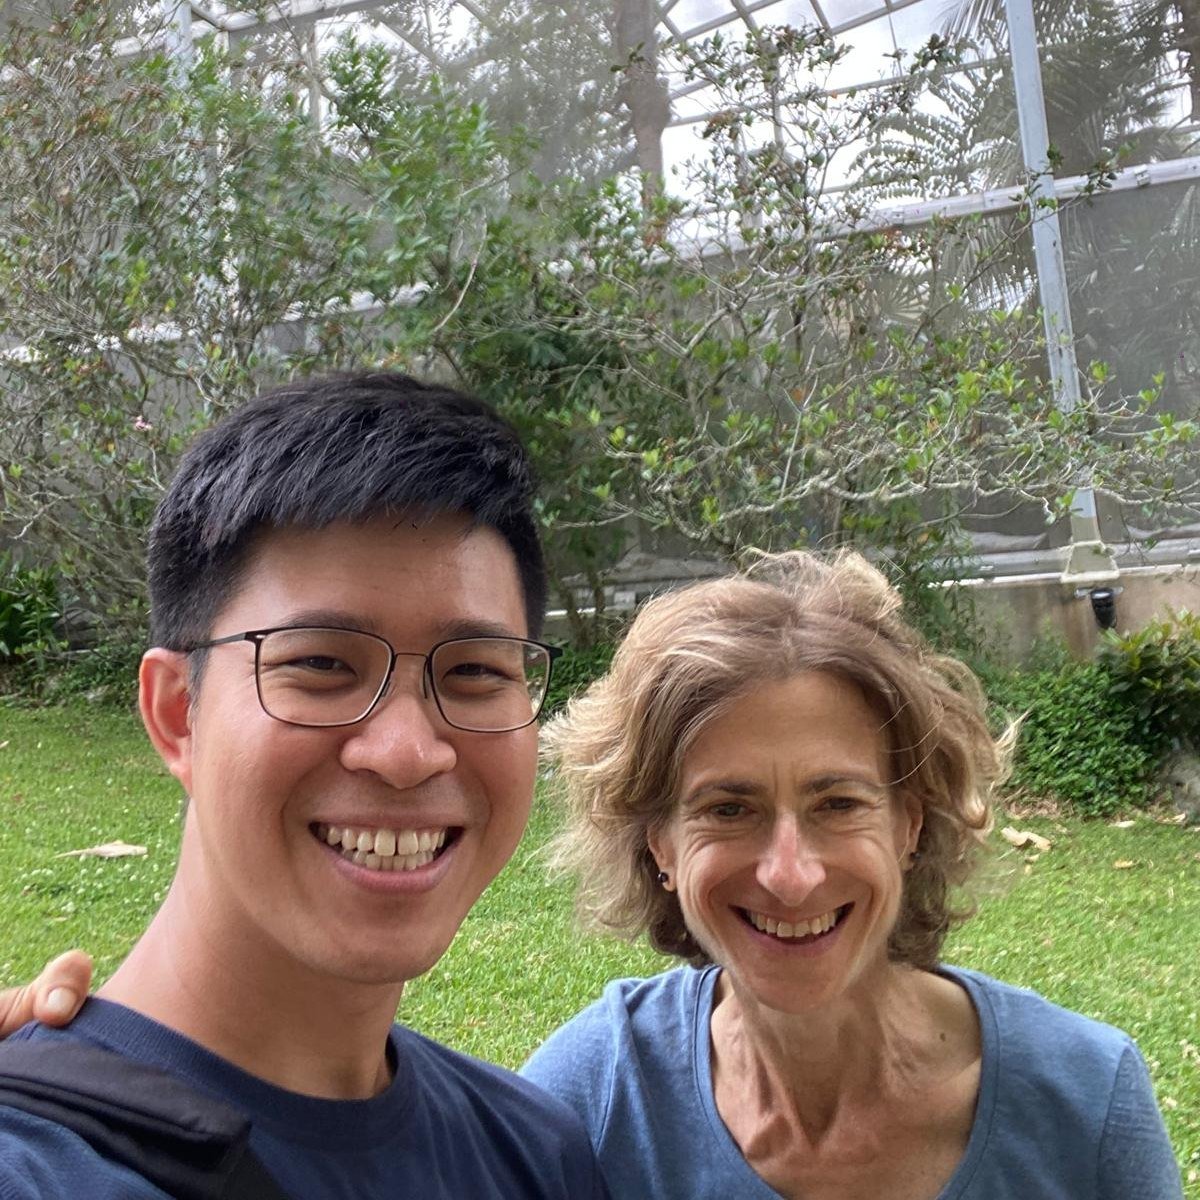 During his professional internship at the University of Florida Wilmot Botanic Gardens Greenhouse @wilmotbotanicalgardens therapeutic horticulture programme, our co-founder Xin Kai had the honour to connect with a remarkable individual - meet Eva Cre